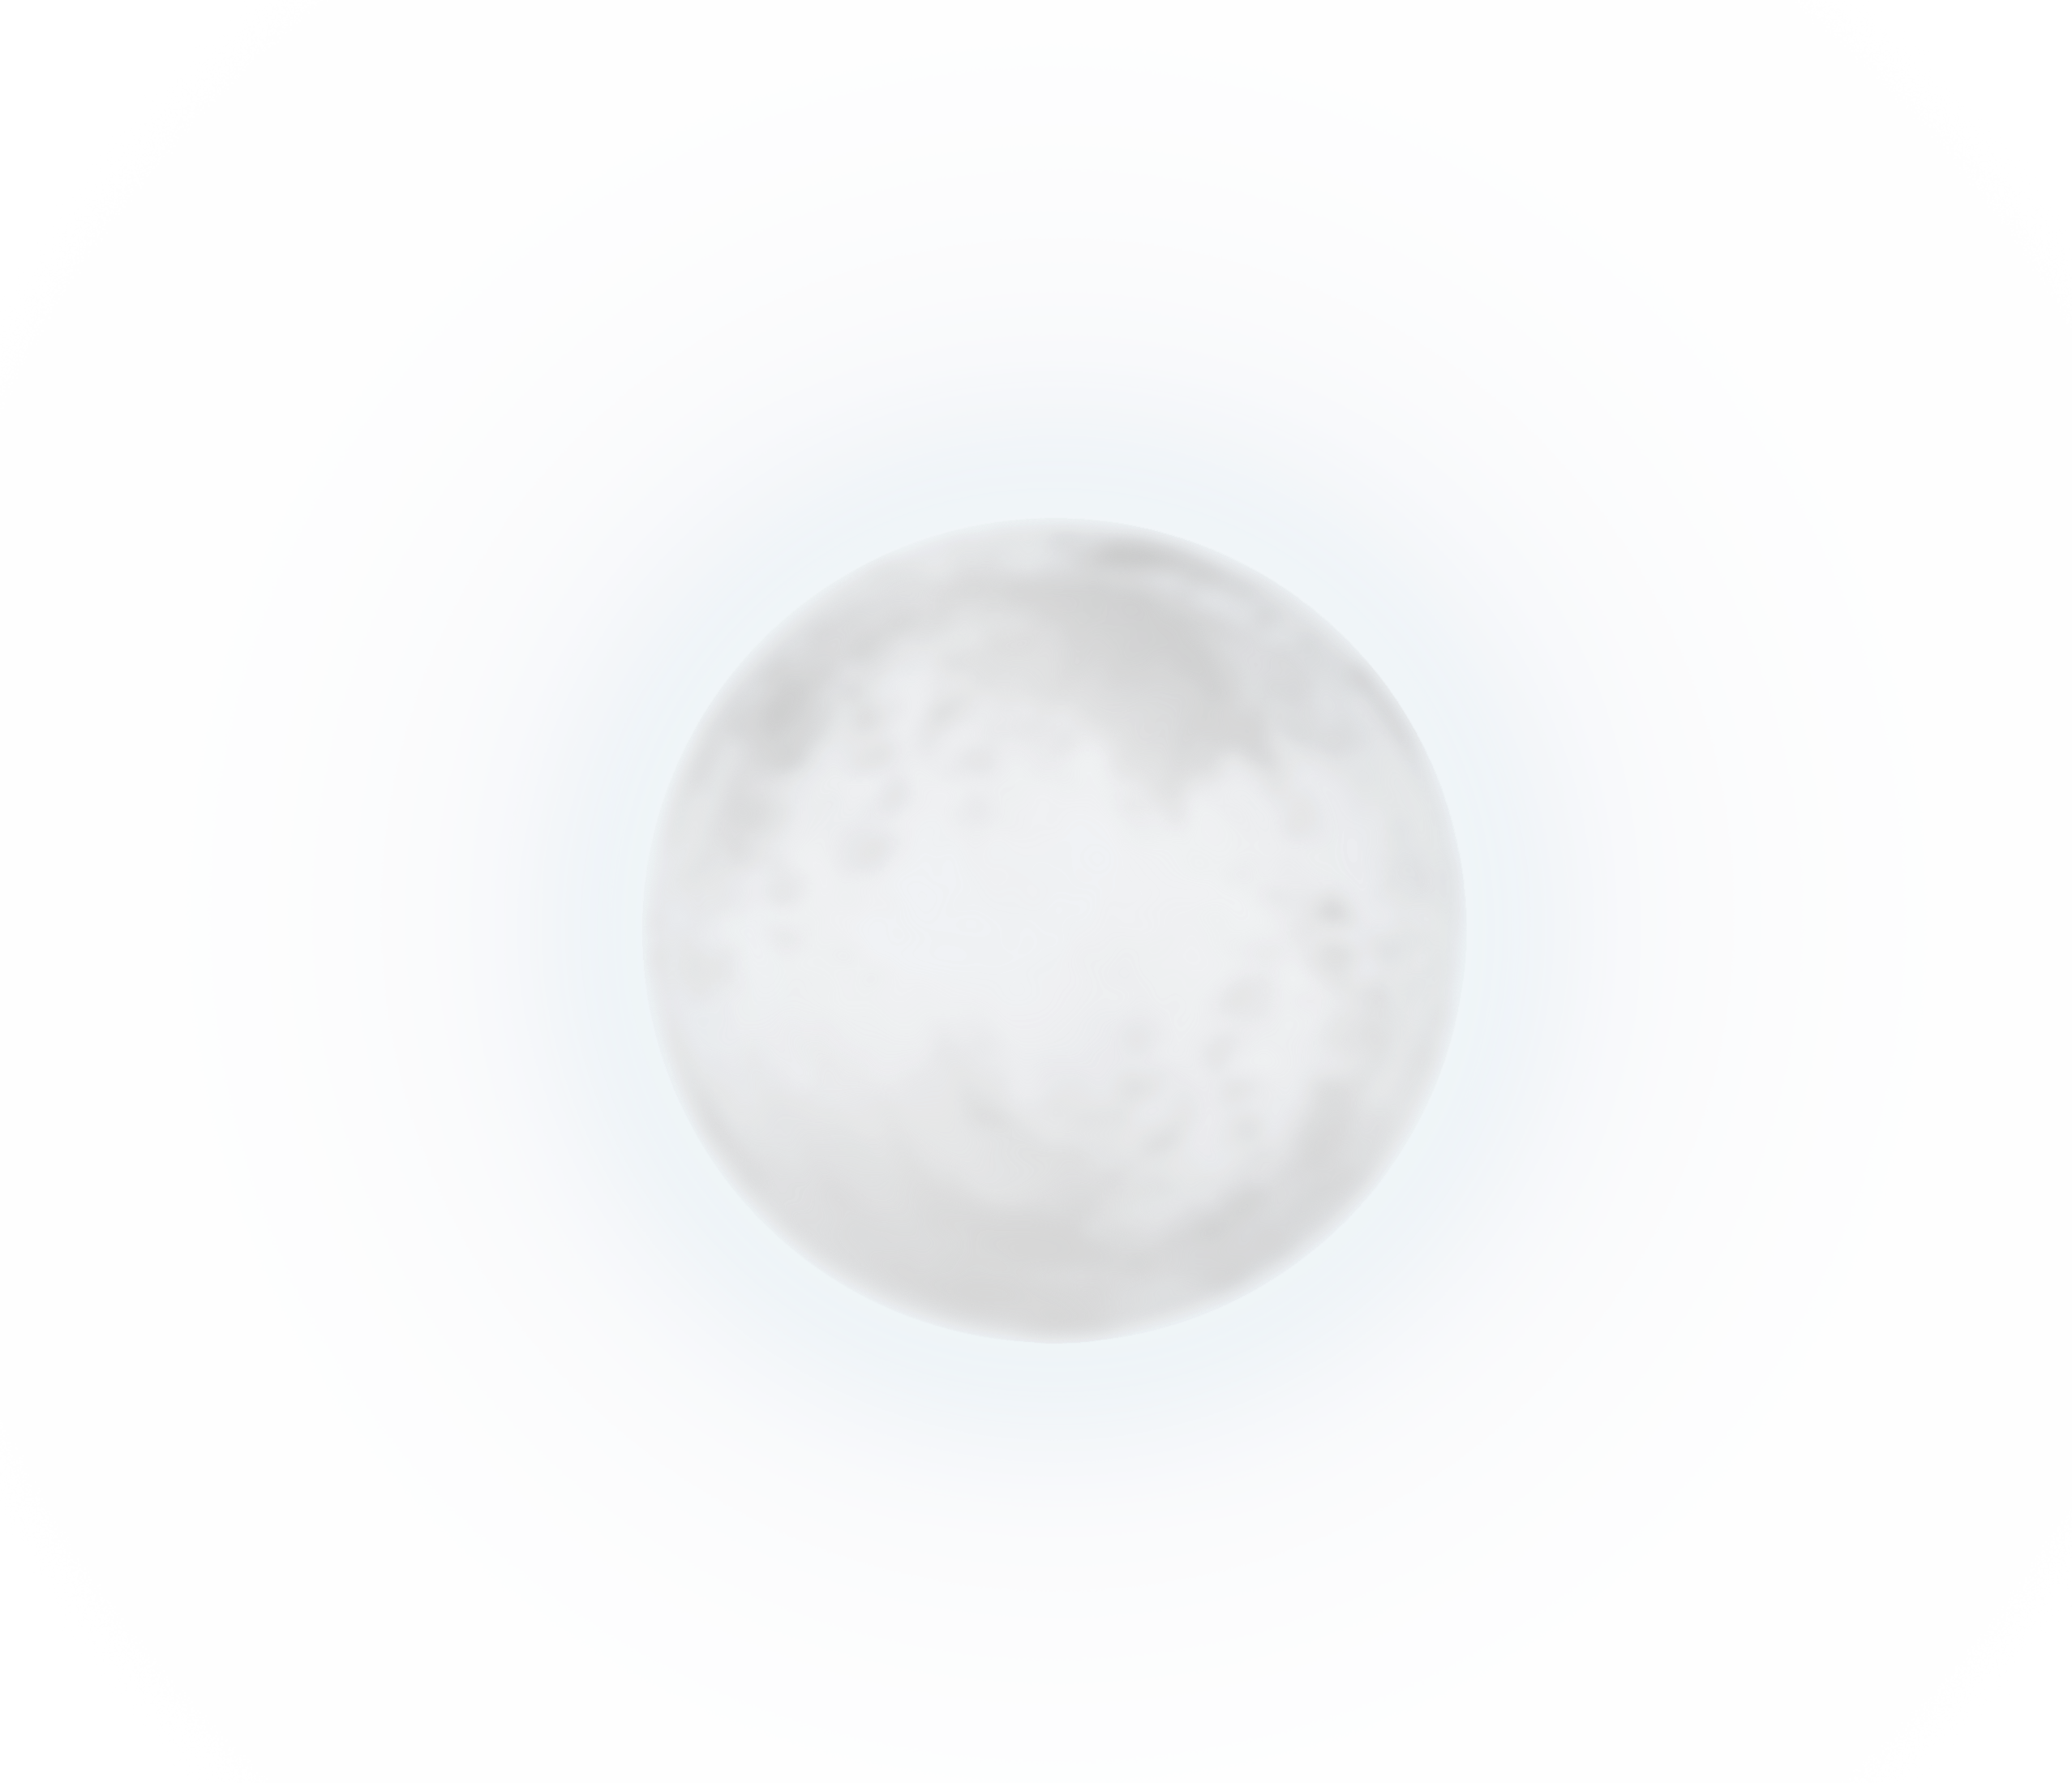 White Moon PNG Clipart Picture | Gallery Yopriceville - High ...